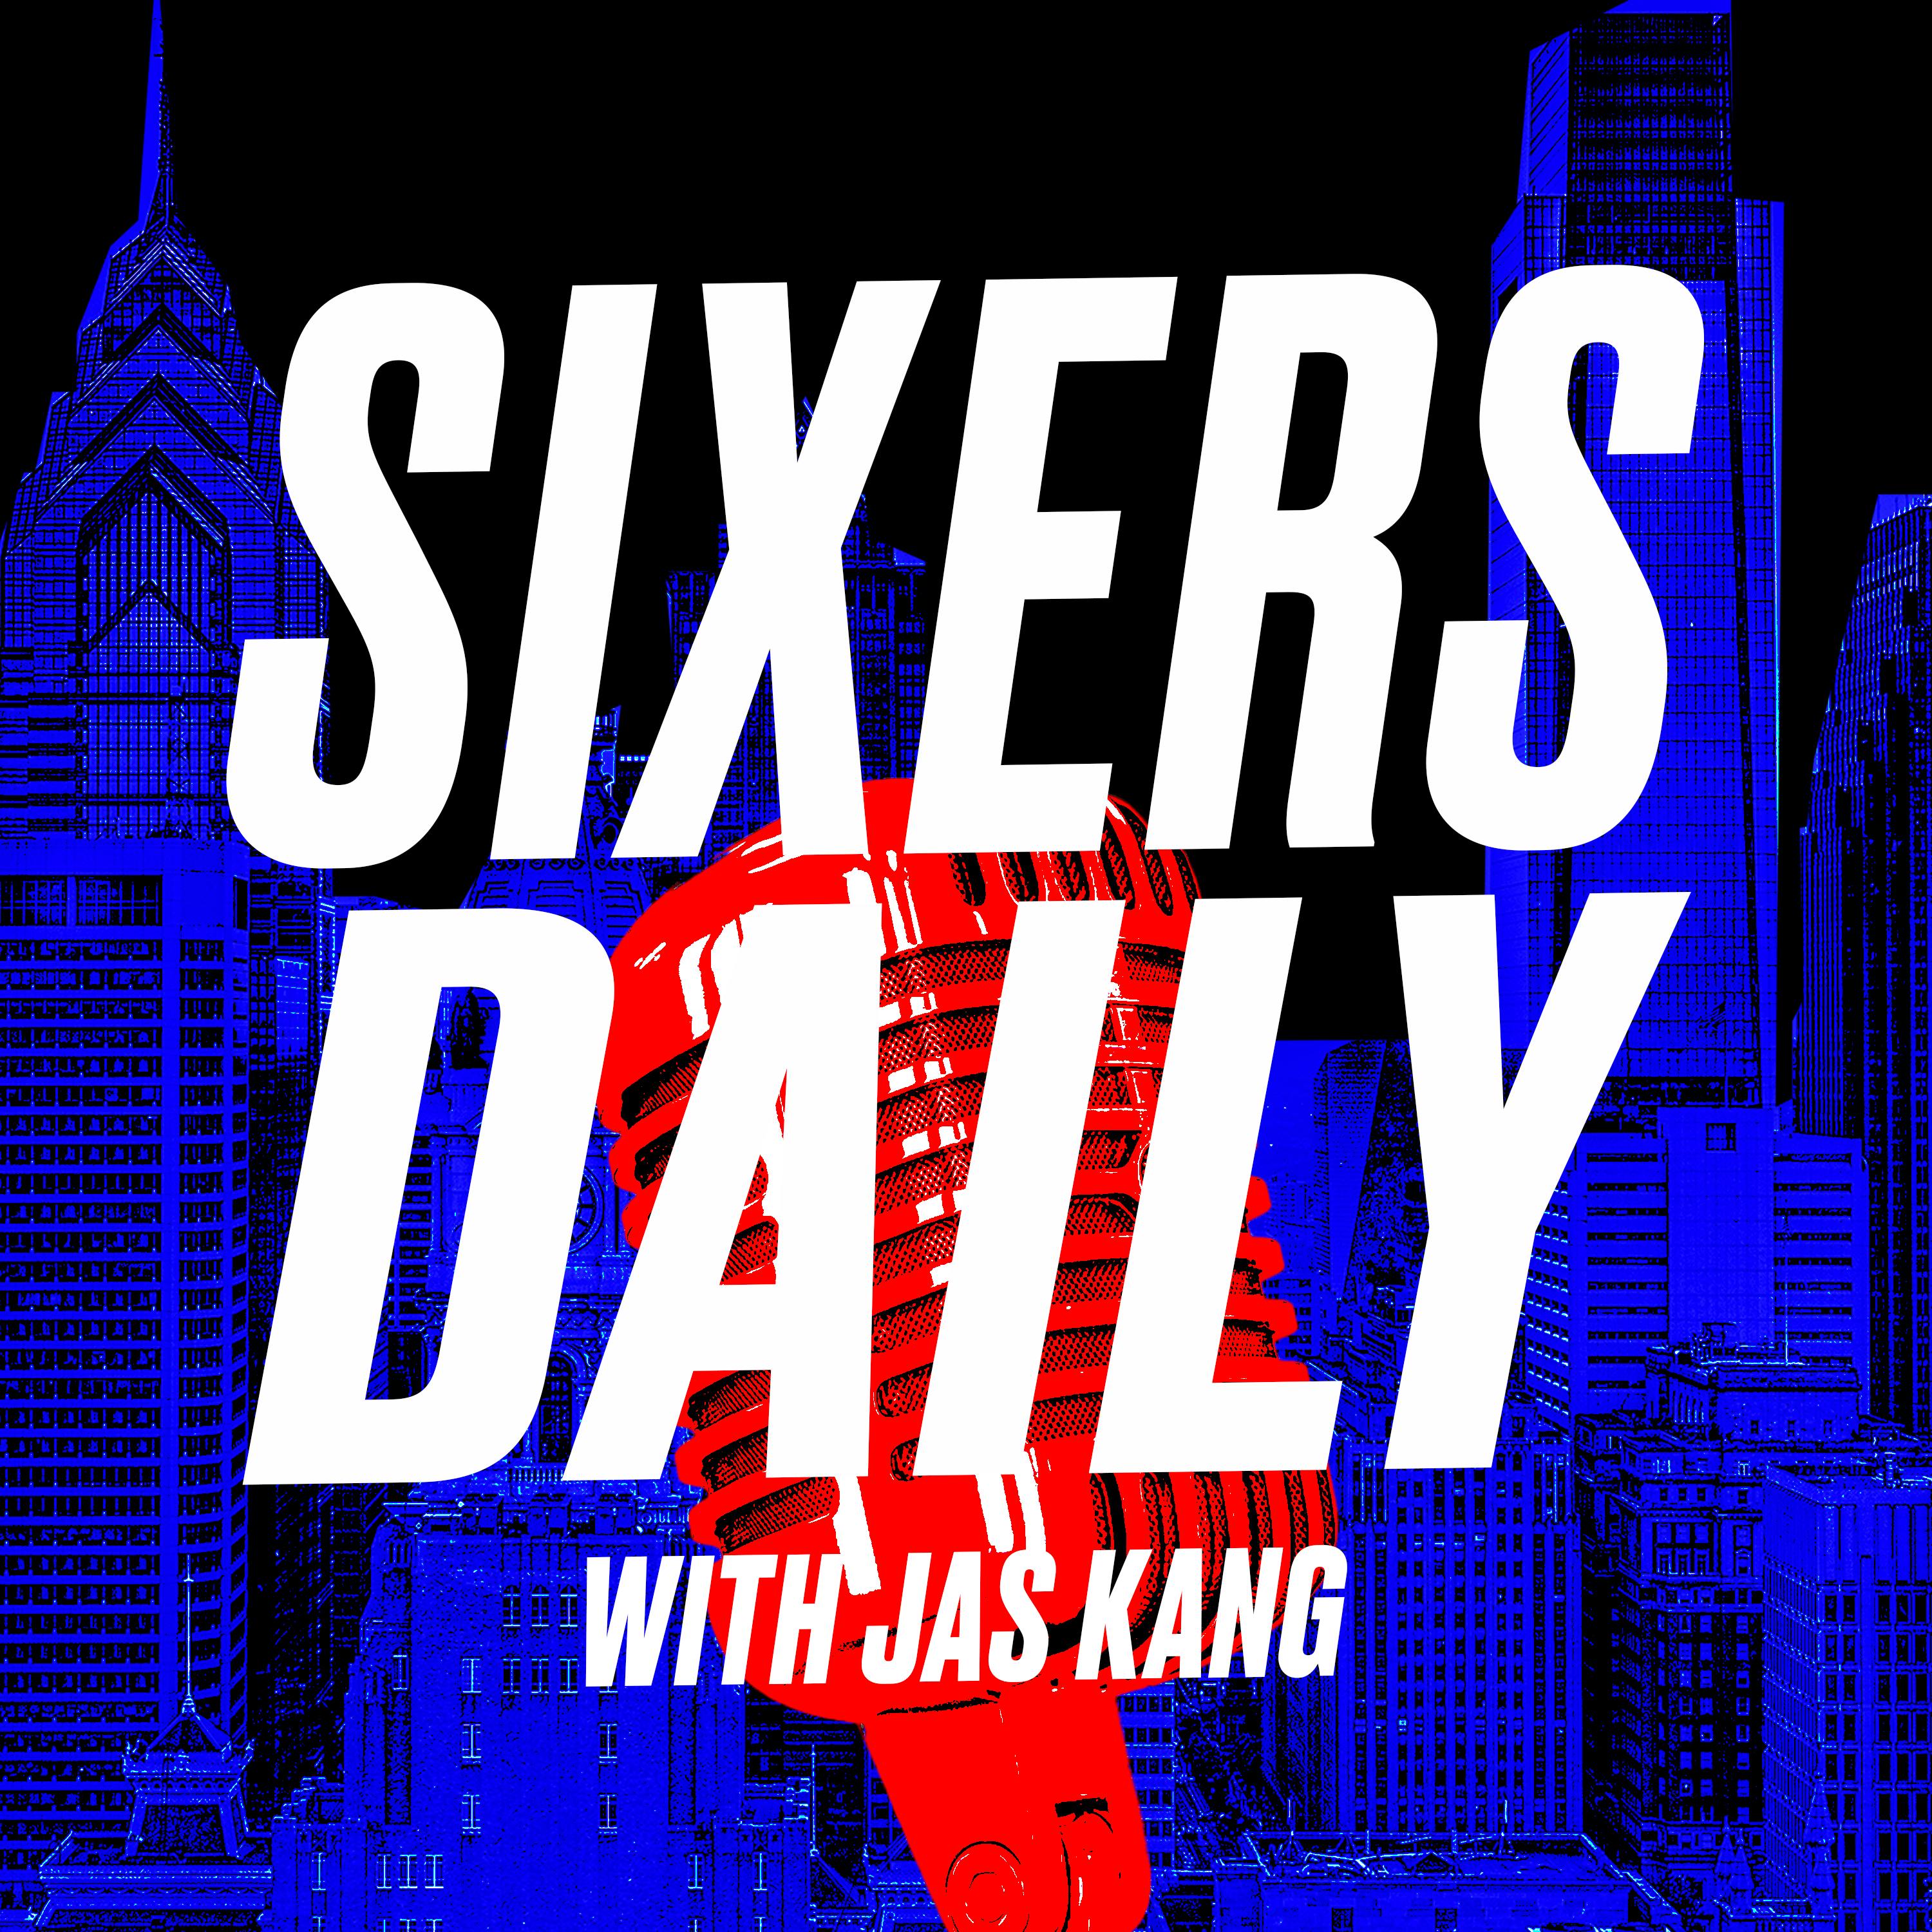 Sixers Daily with Jas Kang - Philly signs P.J. Tucker and Danuel House, Kevin Durant demands a trade from Brooklyn, Jalen Brunson to the Knicks and more from the first hour of NBA free agency. With Pa